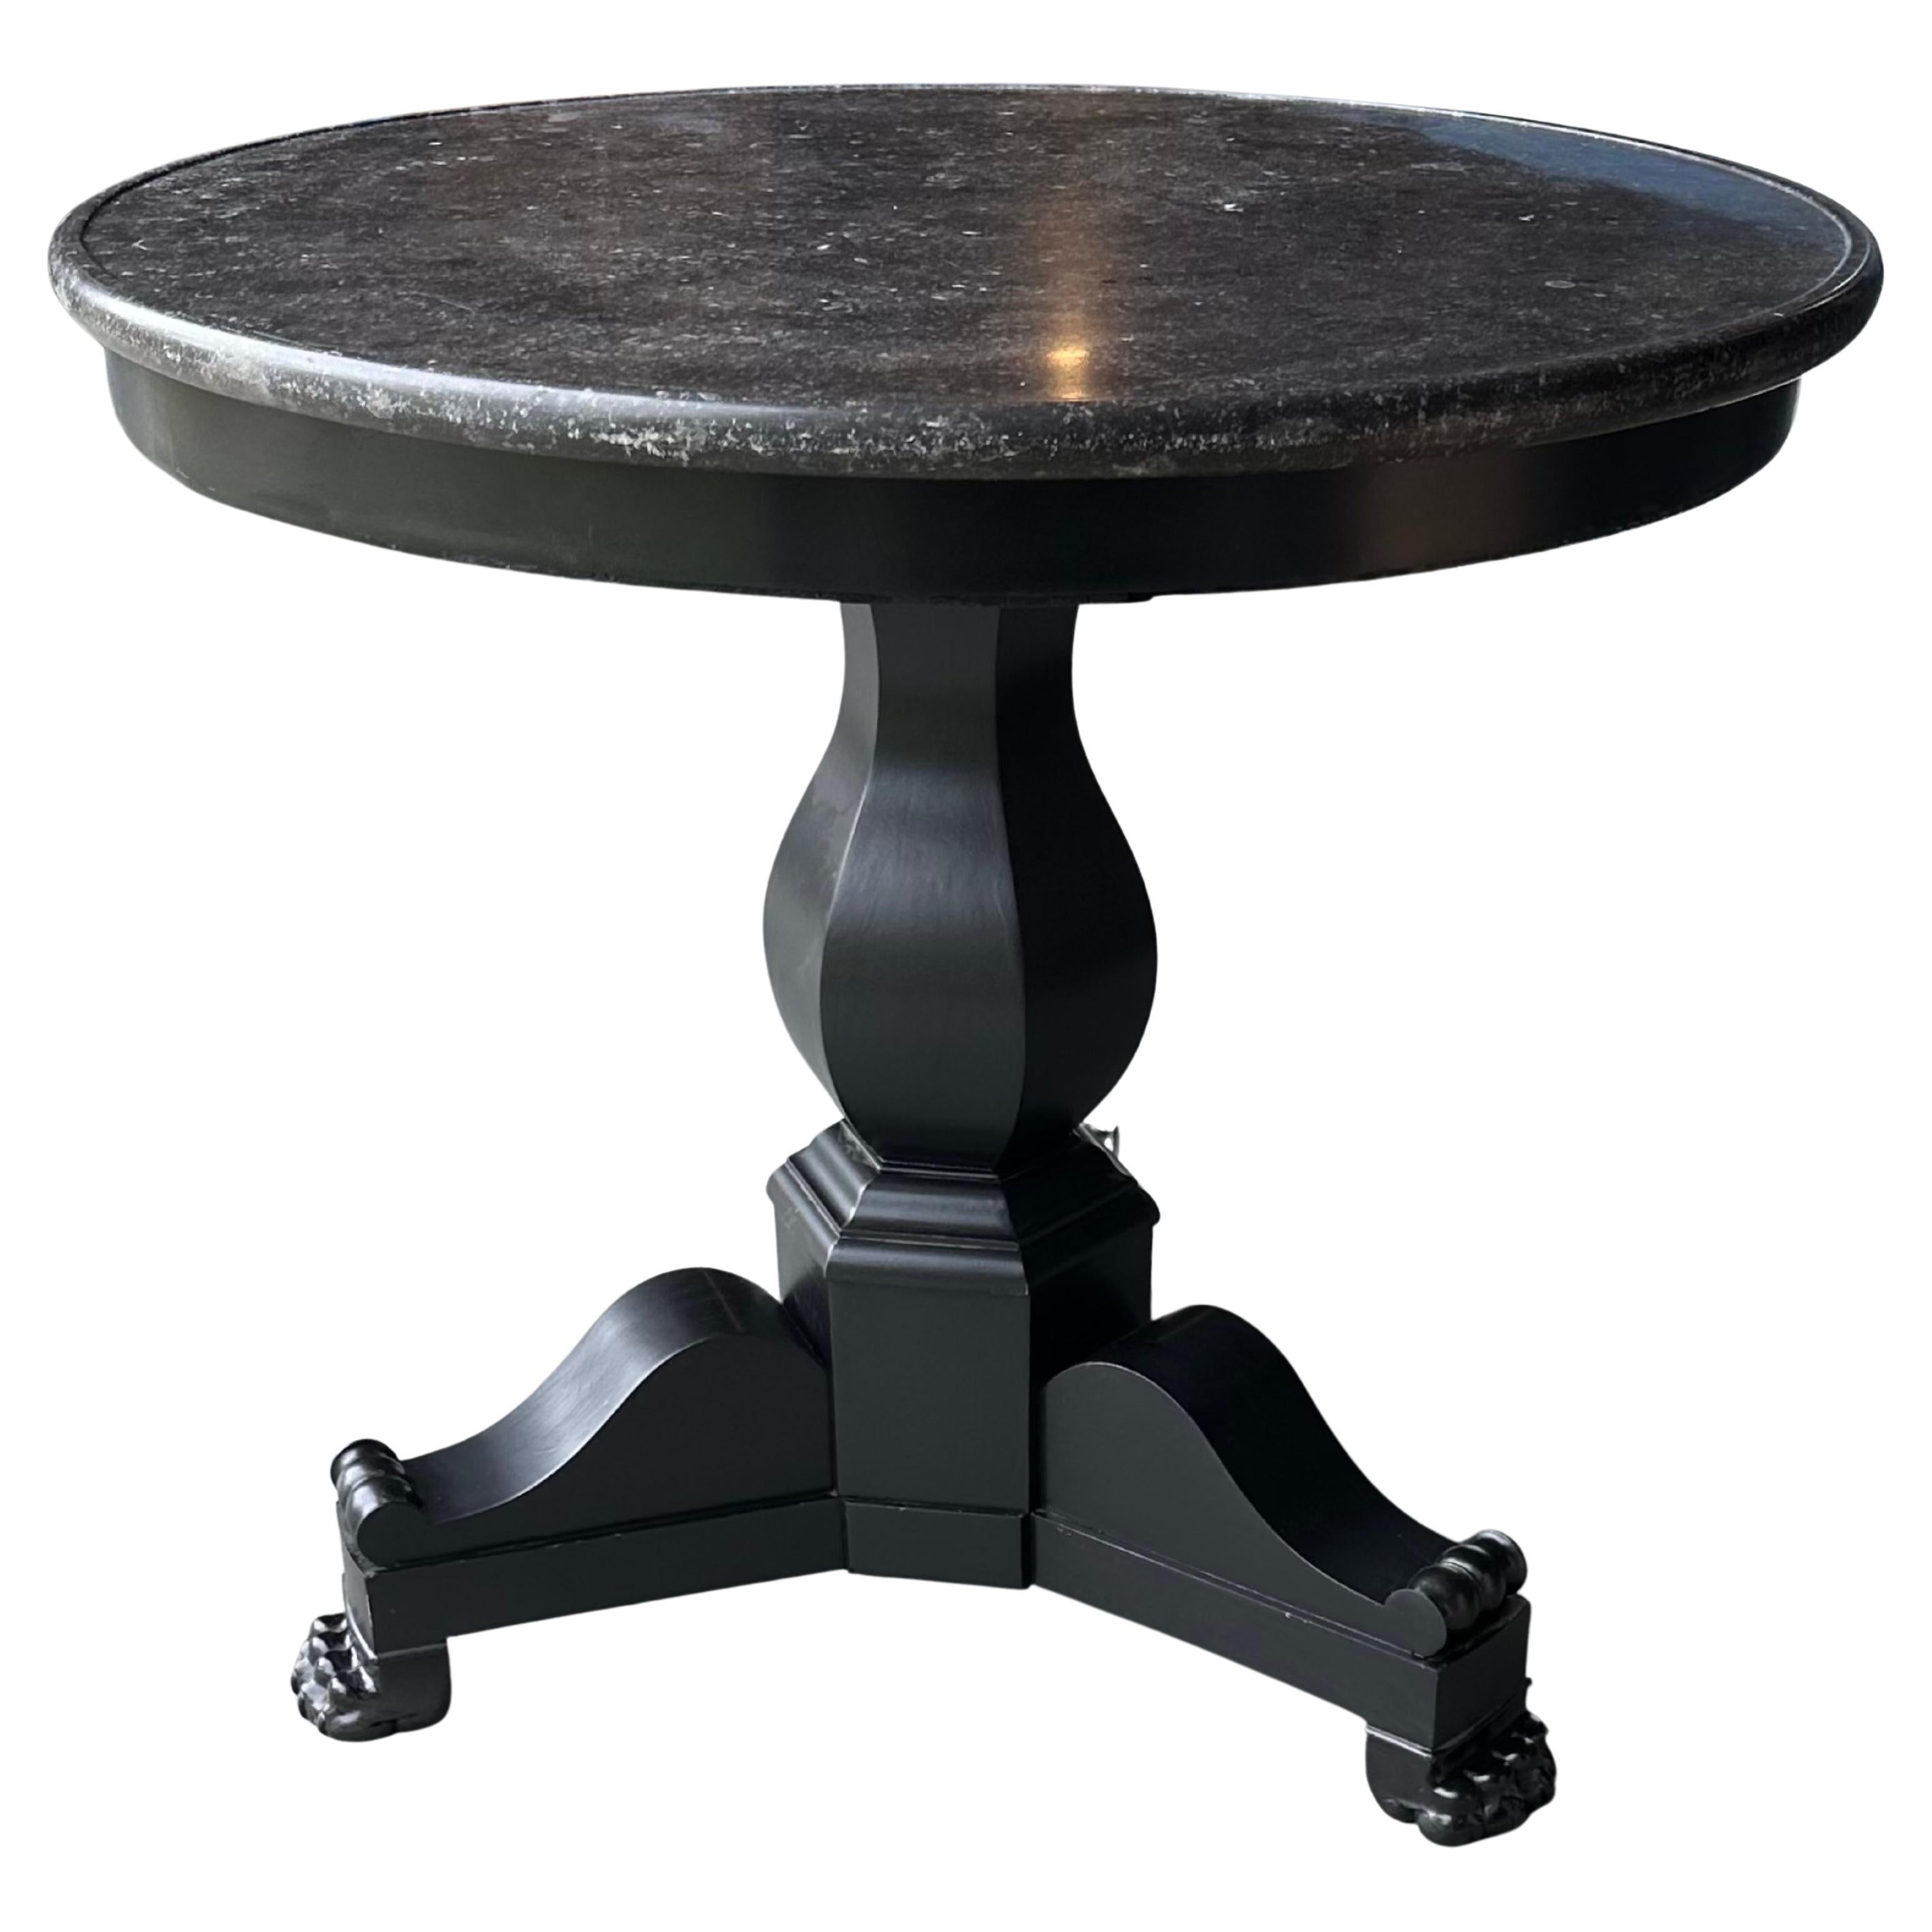 19th Century French Empire Style Gueridon with Black Marble Top For Sale